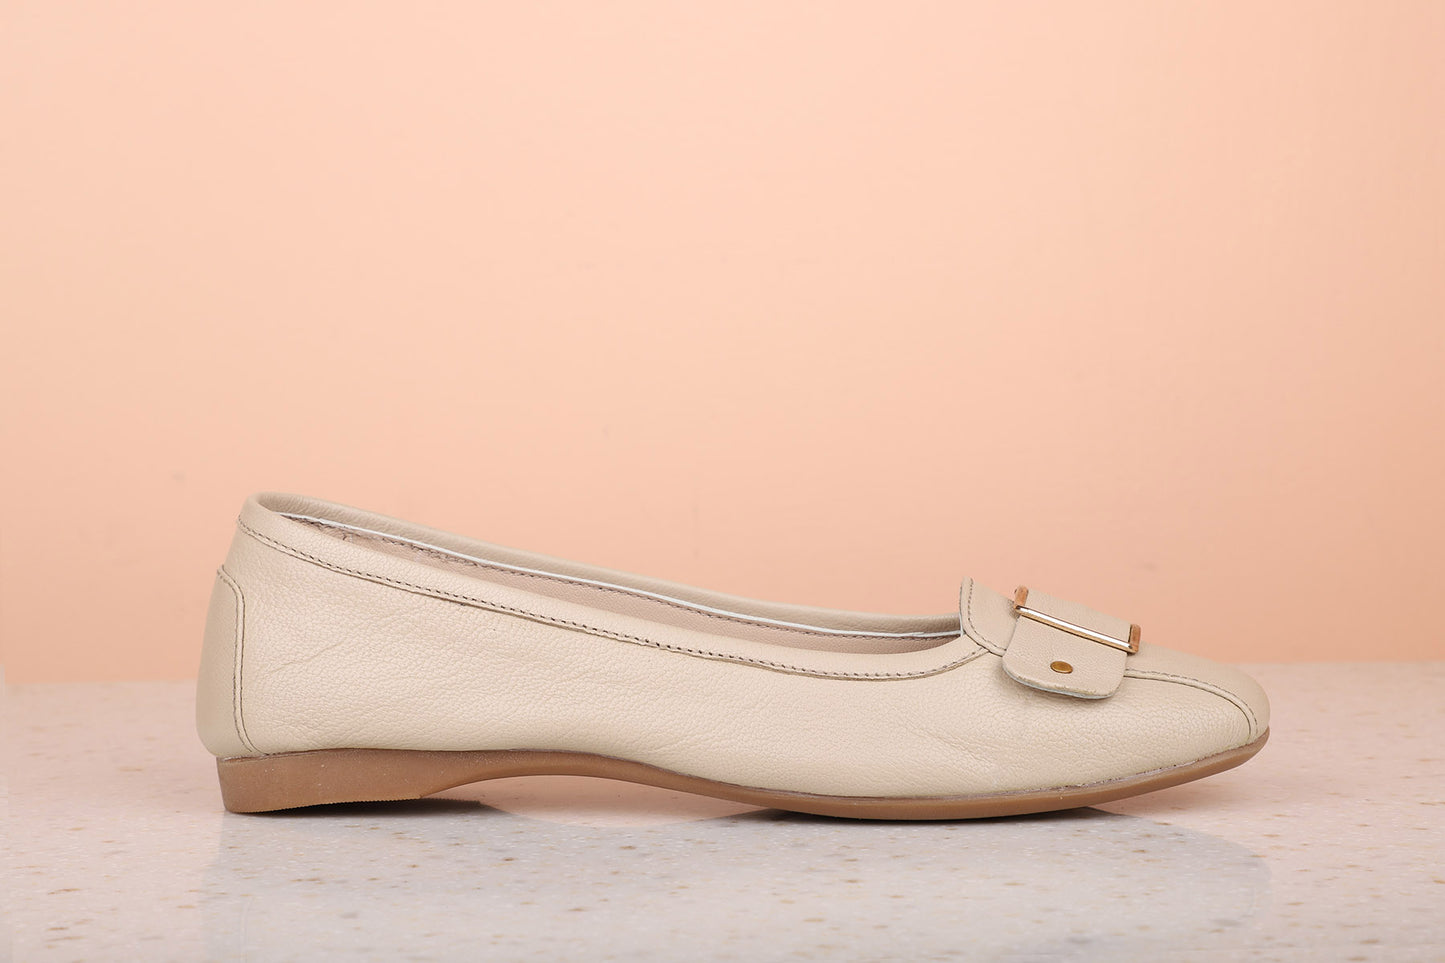 LEATHER BALLERINA-Women's Moccasins-Inc5 Shoes